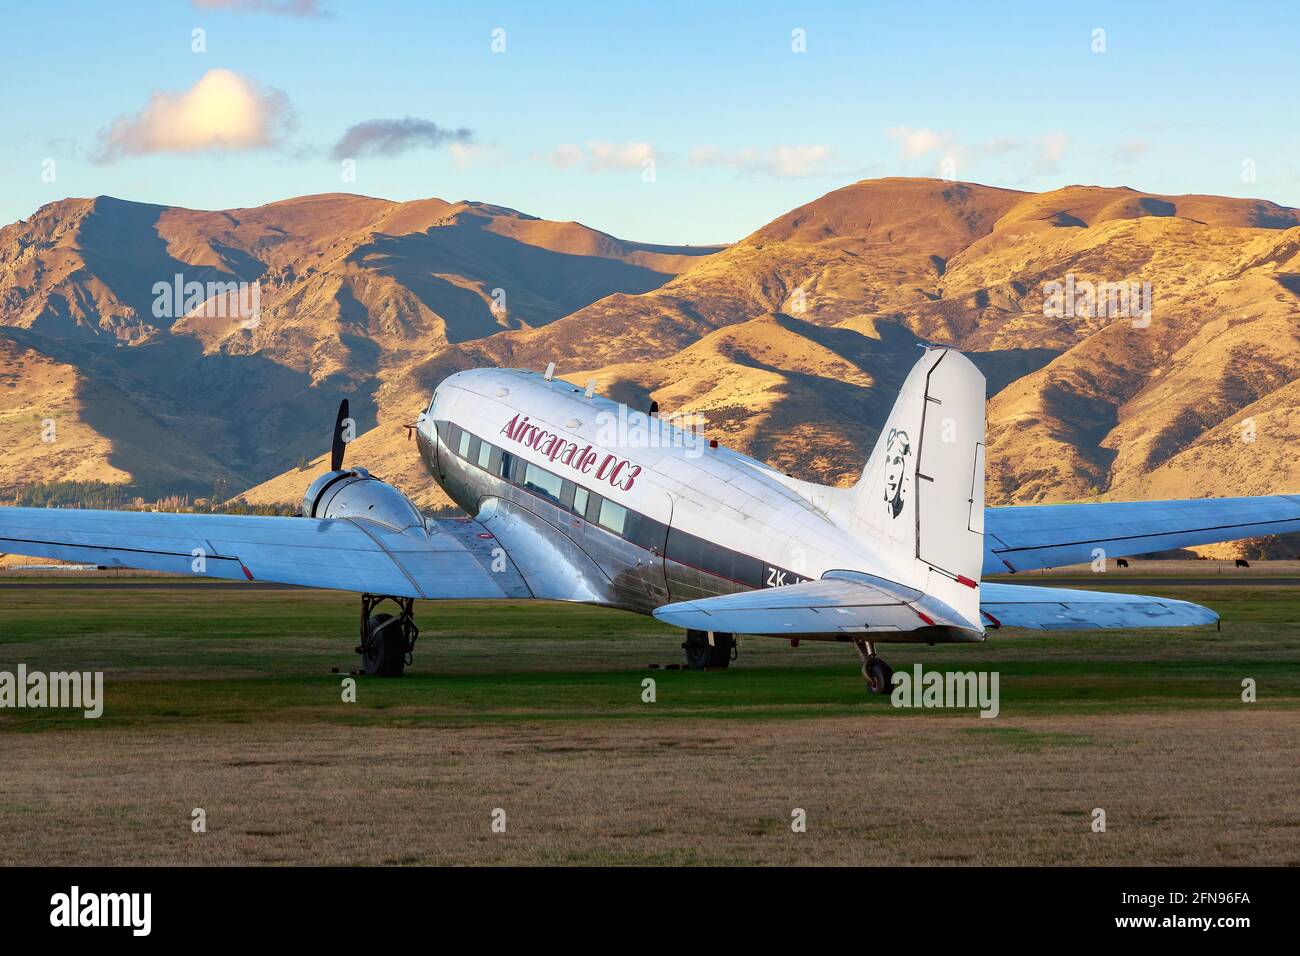 A 1930s Douglas DC-3 airliner on a field in Wanaka, New Zealand, with a mountain range in the background Stock Photo